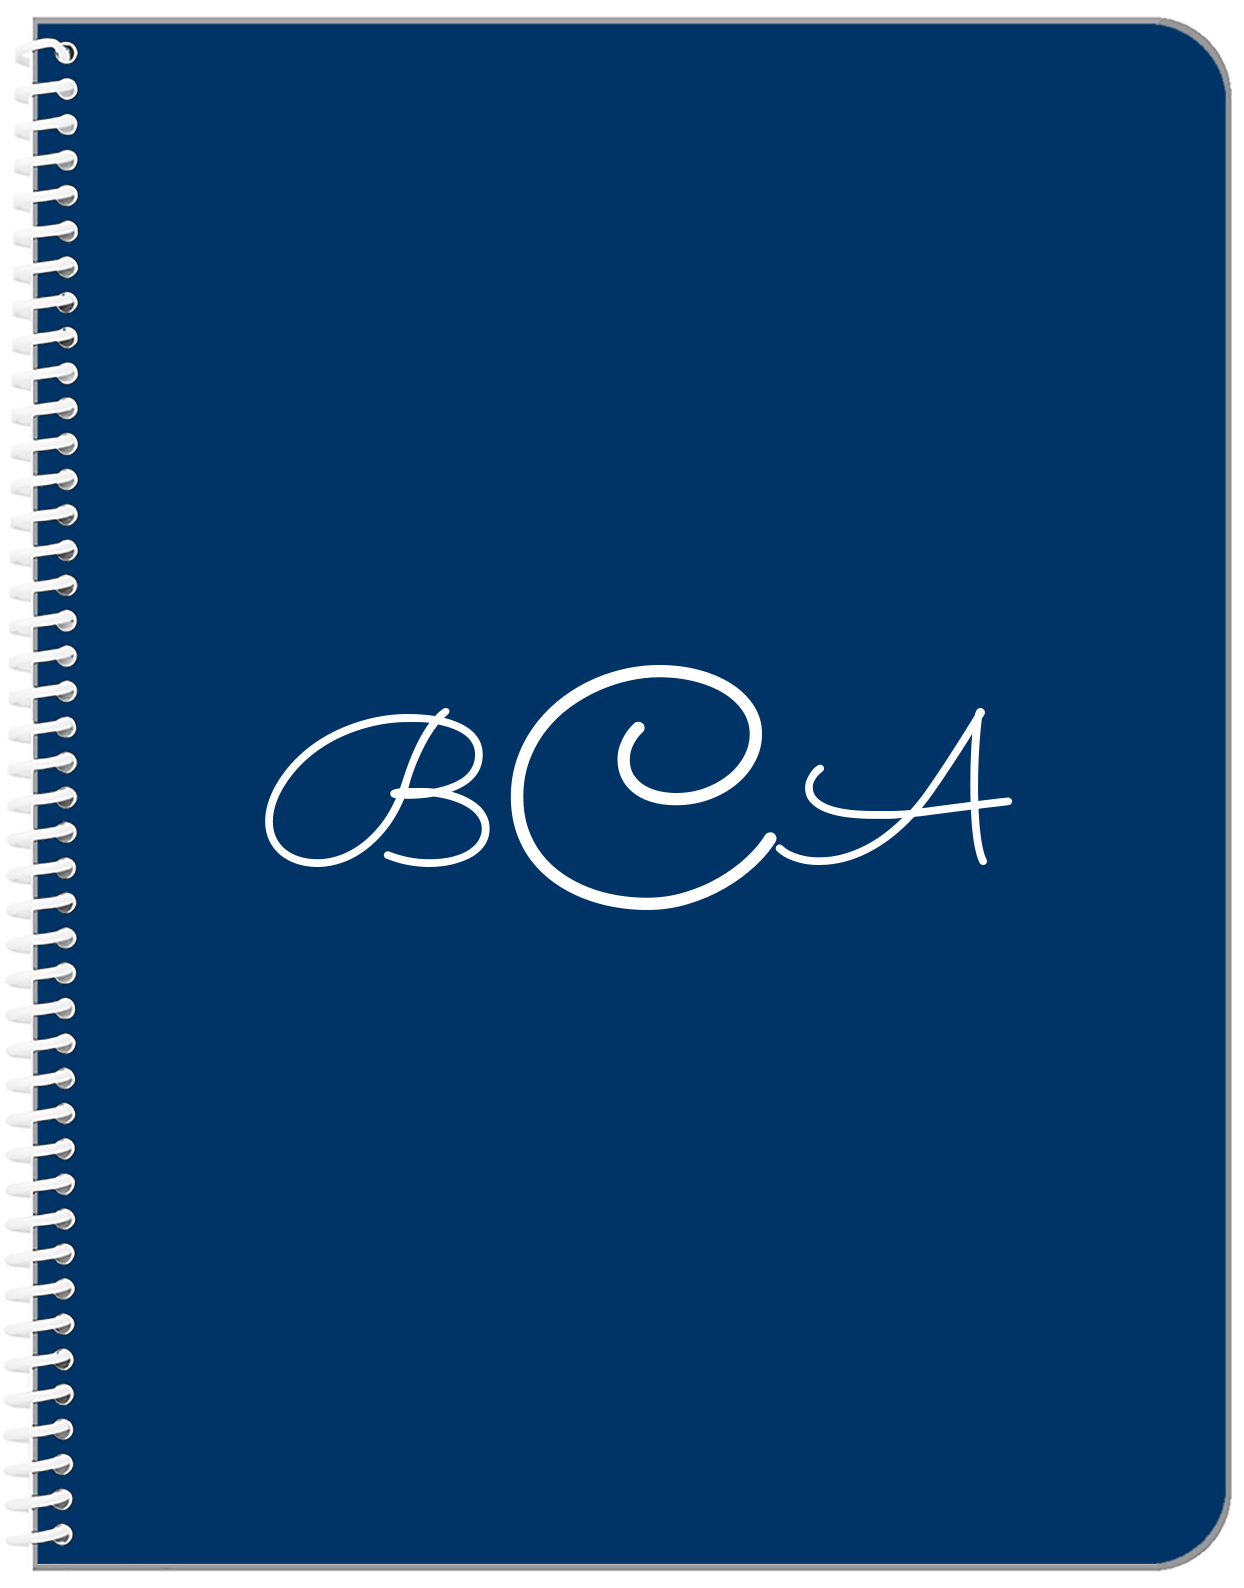 Personalized Solid Color Notebook  - Blue Background - Monogram - Front View